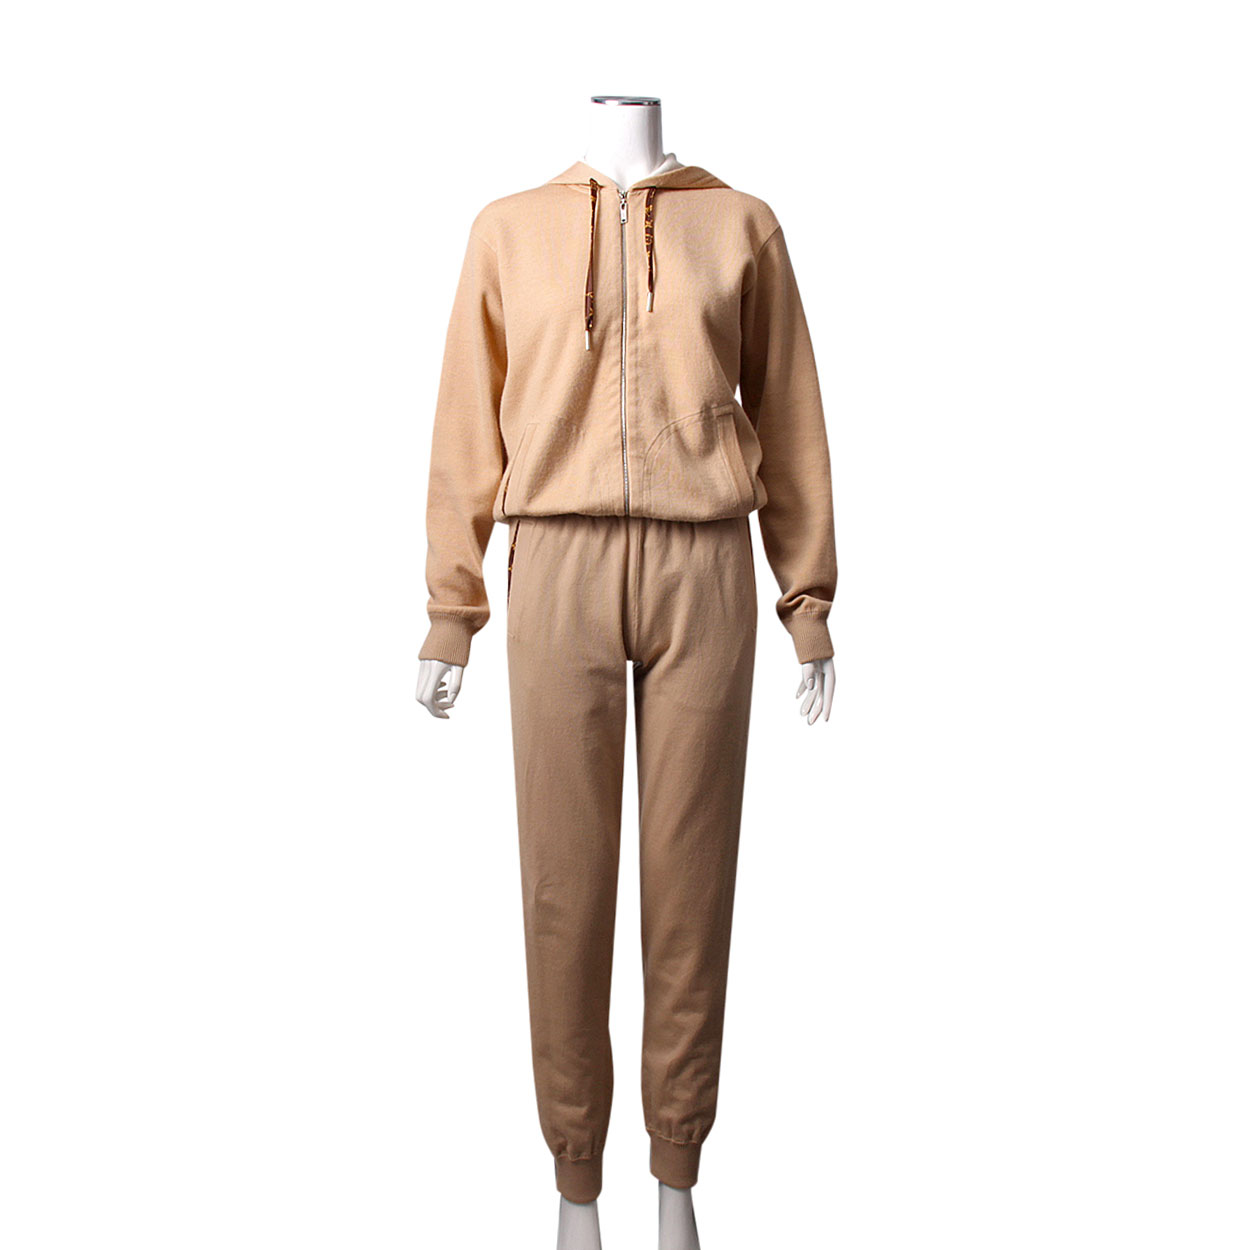 Luis Vuitton Tracksuits for sale in Windhoek - Tracksuits - Kalahari Deals  Namibia